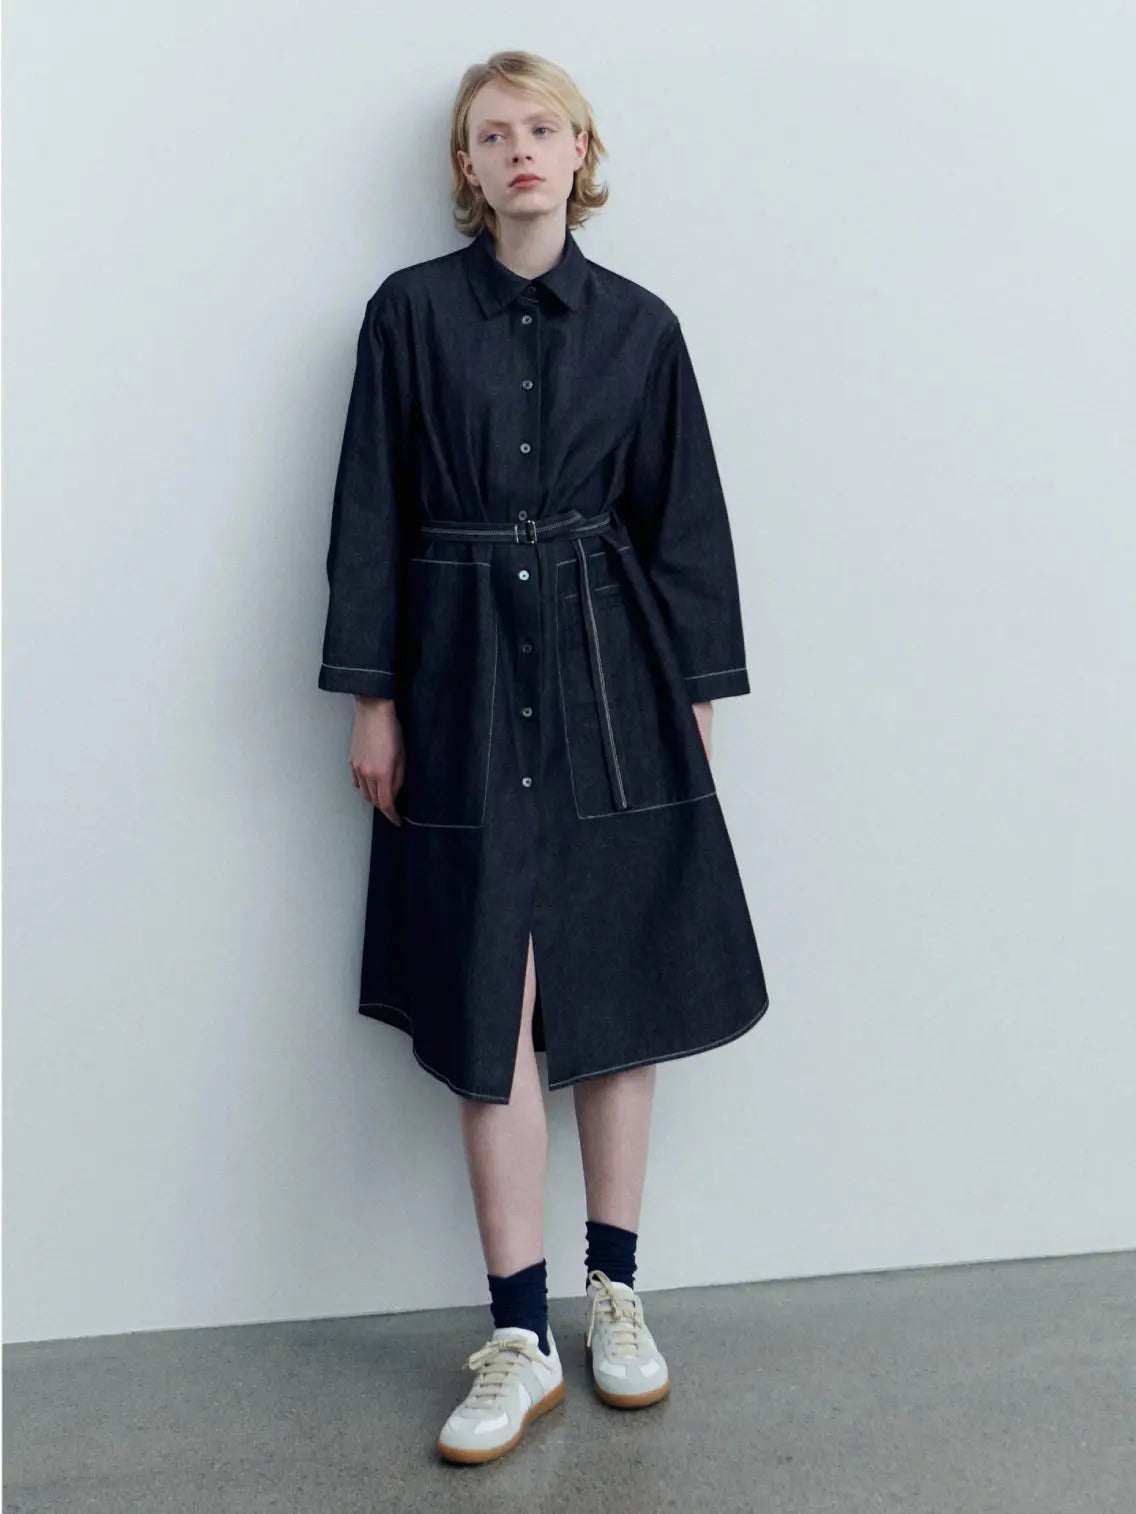 The Giselle Denim Dress by Jan Machenhauer is a dark denim, button-down shirt dress with long sleeves, a collar, and a waist belt. The dress features two front pockets, white buttons down the front, and a flared skirt. Available at BassalStore in Barcelona.